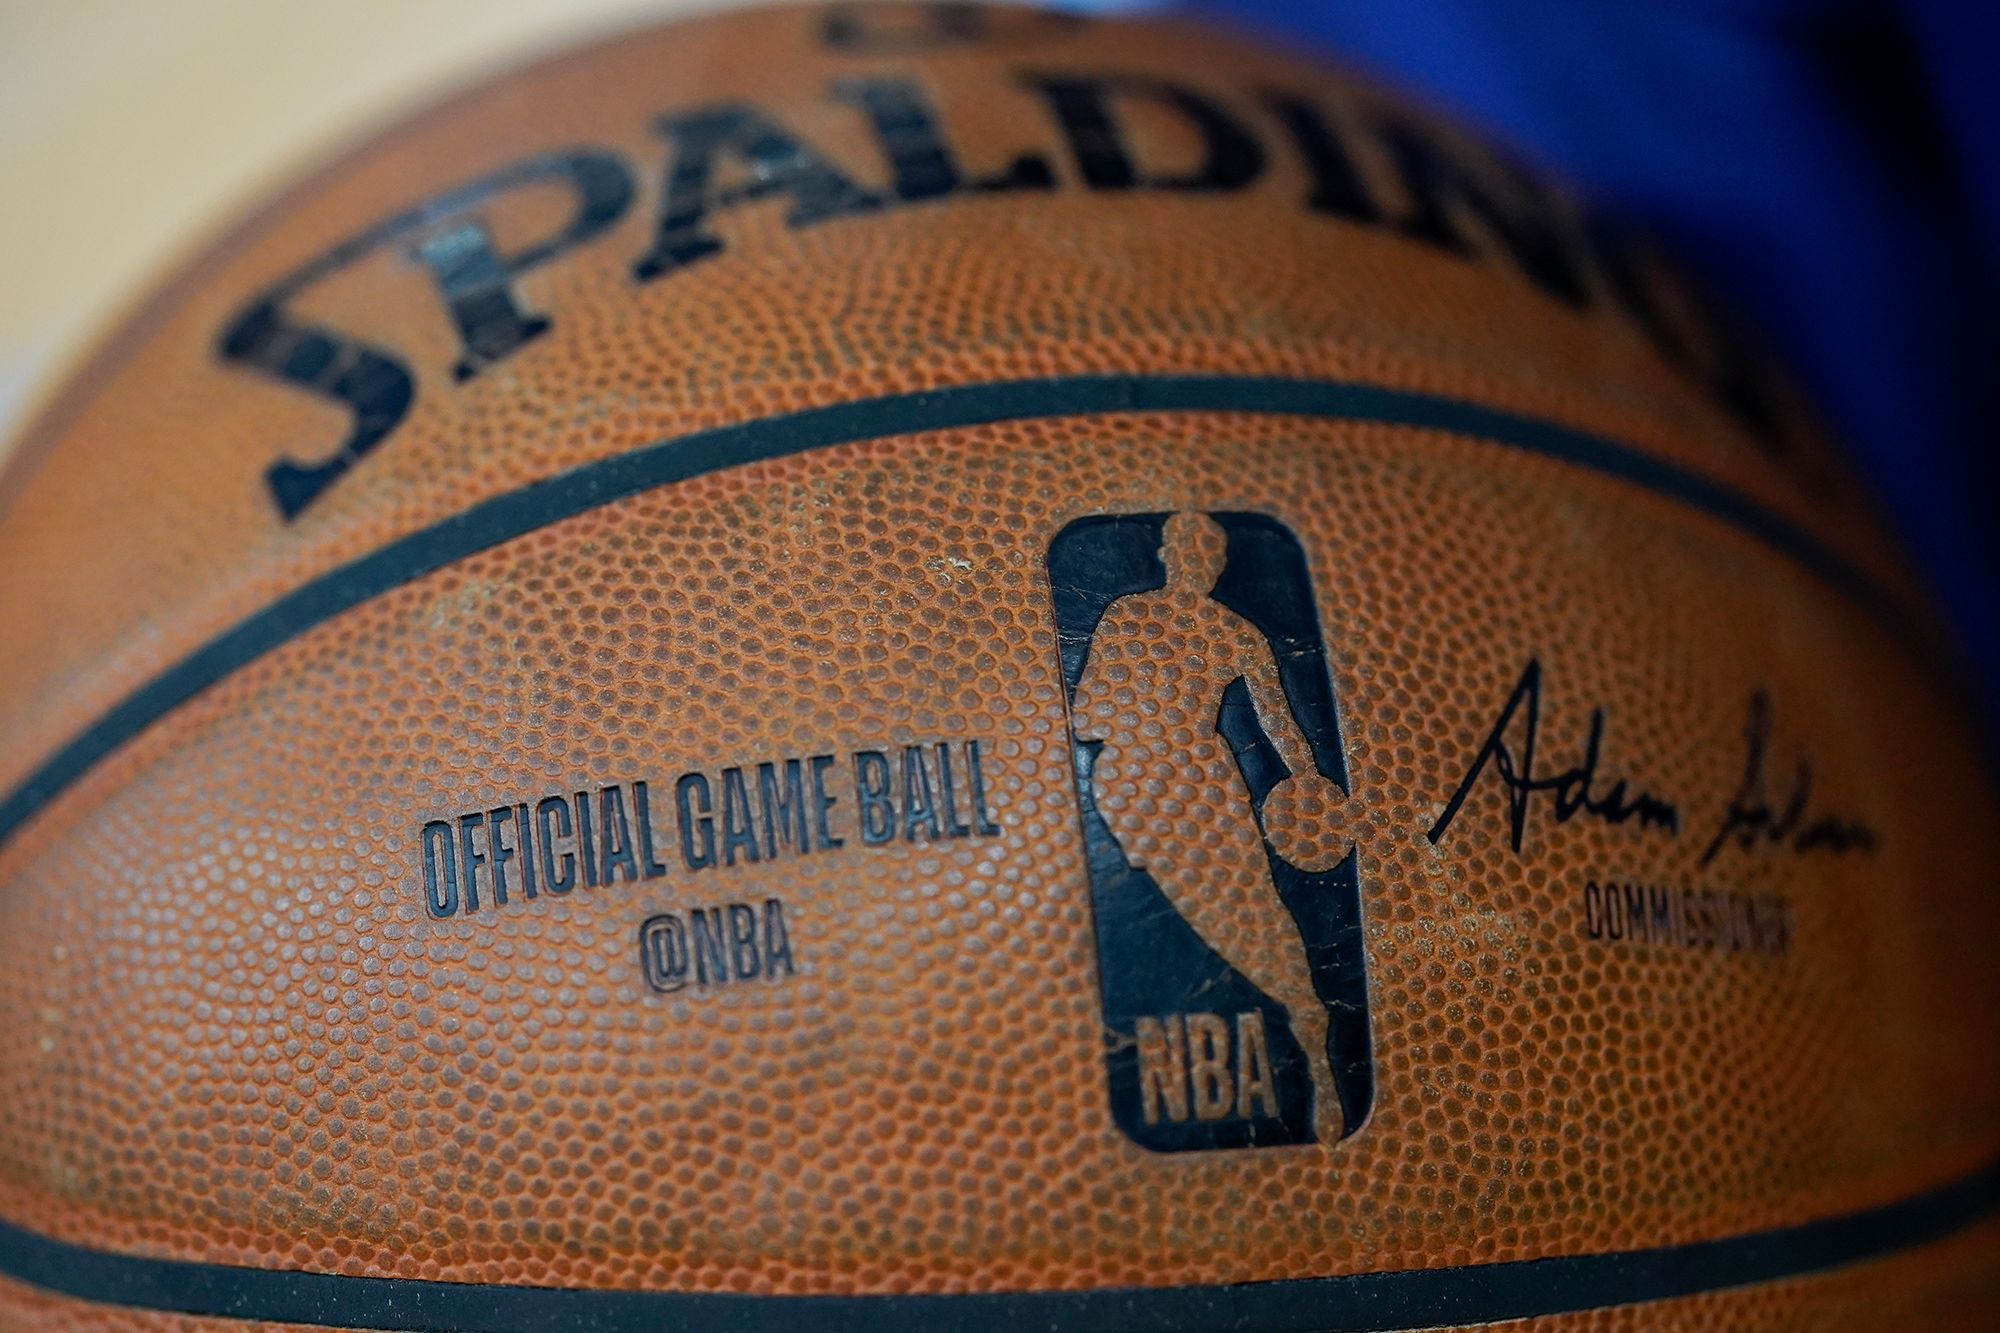 GAME USED AUTHENTIC NBA GAME BASKETBALL vs store spalding nba game ball  comparison & review 